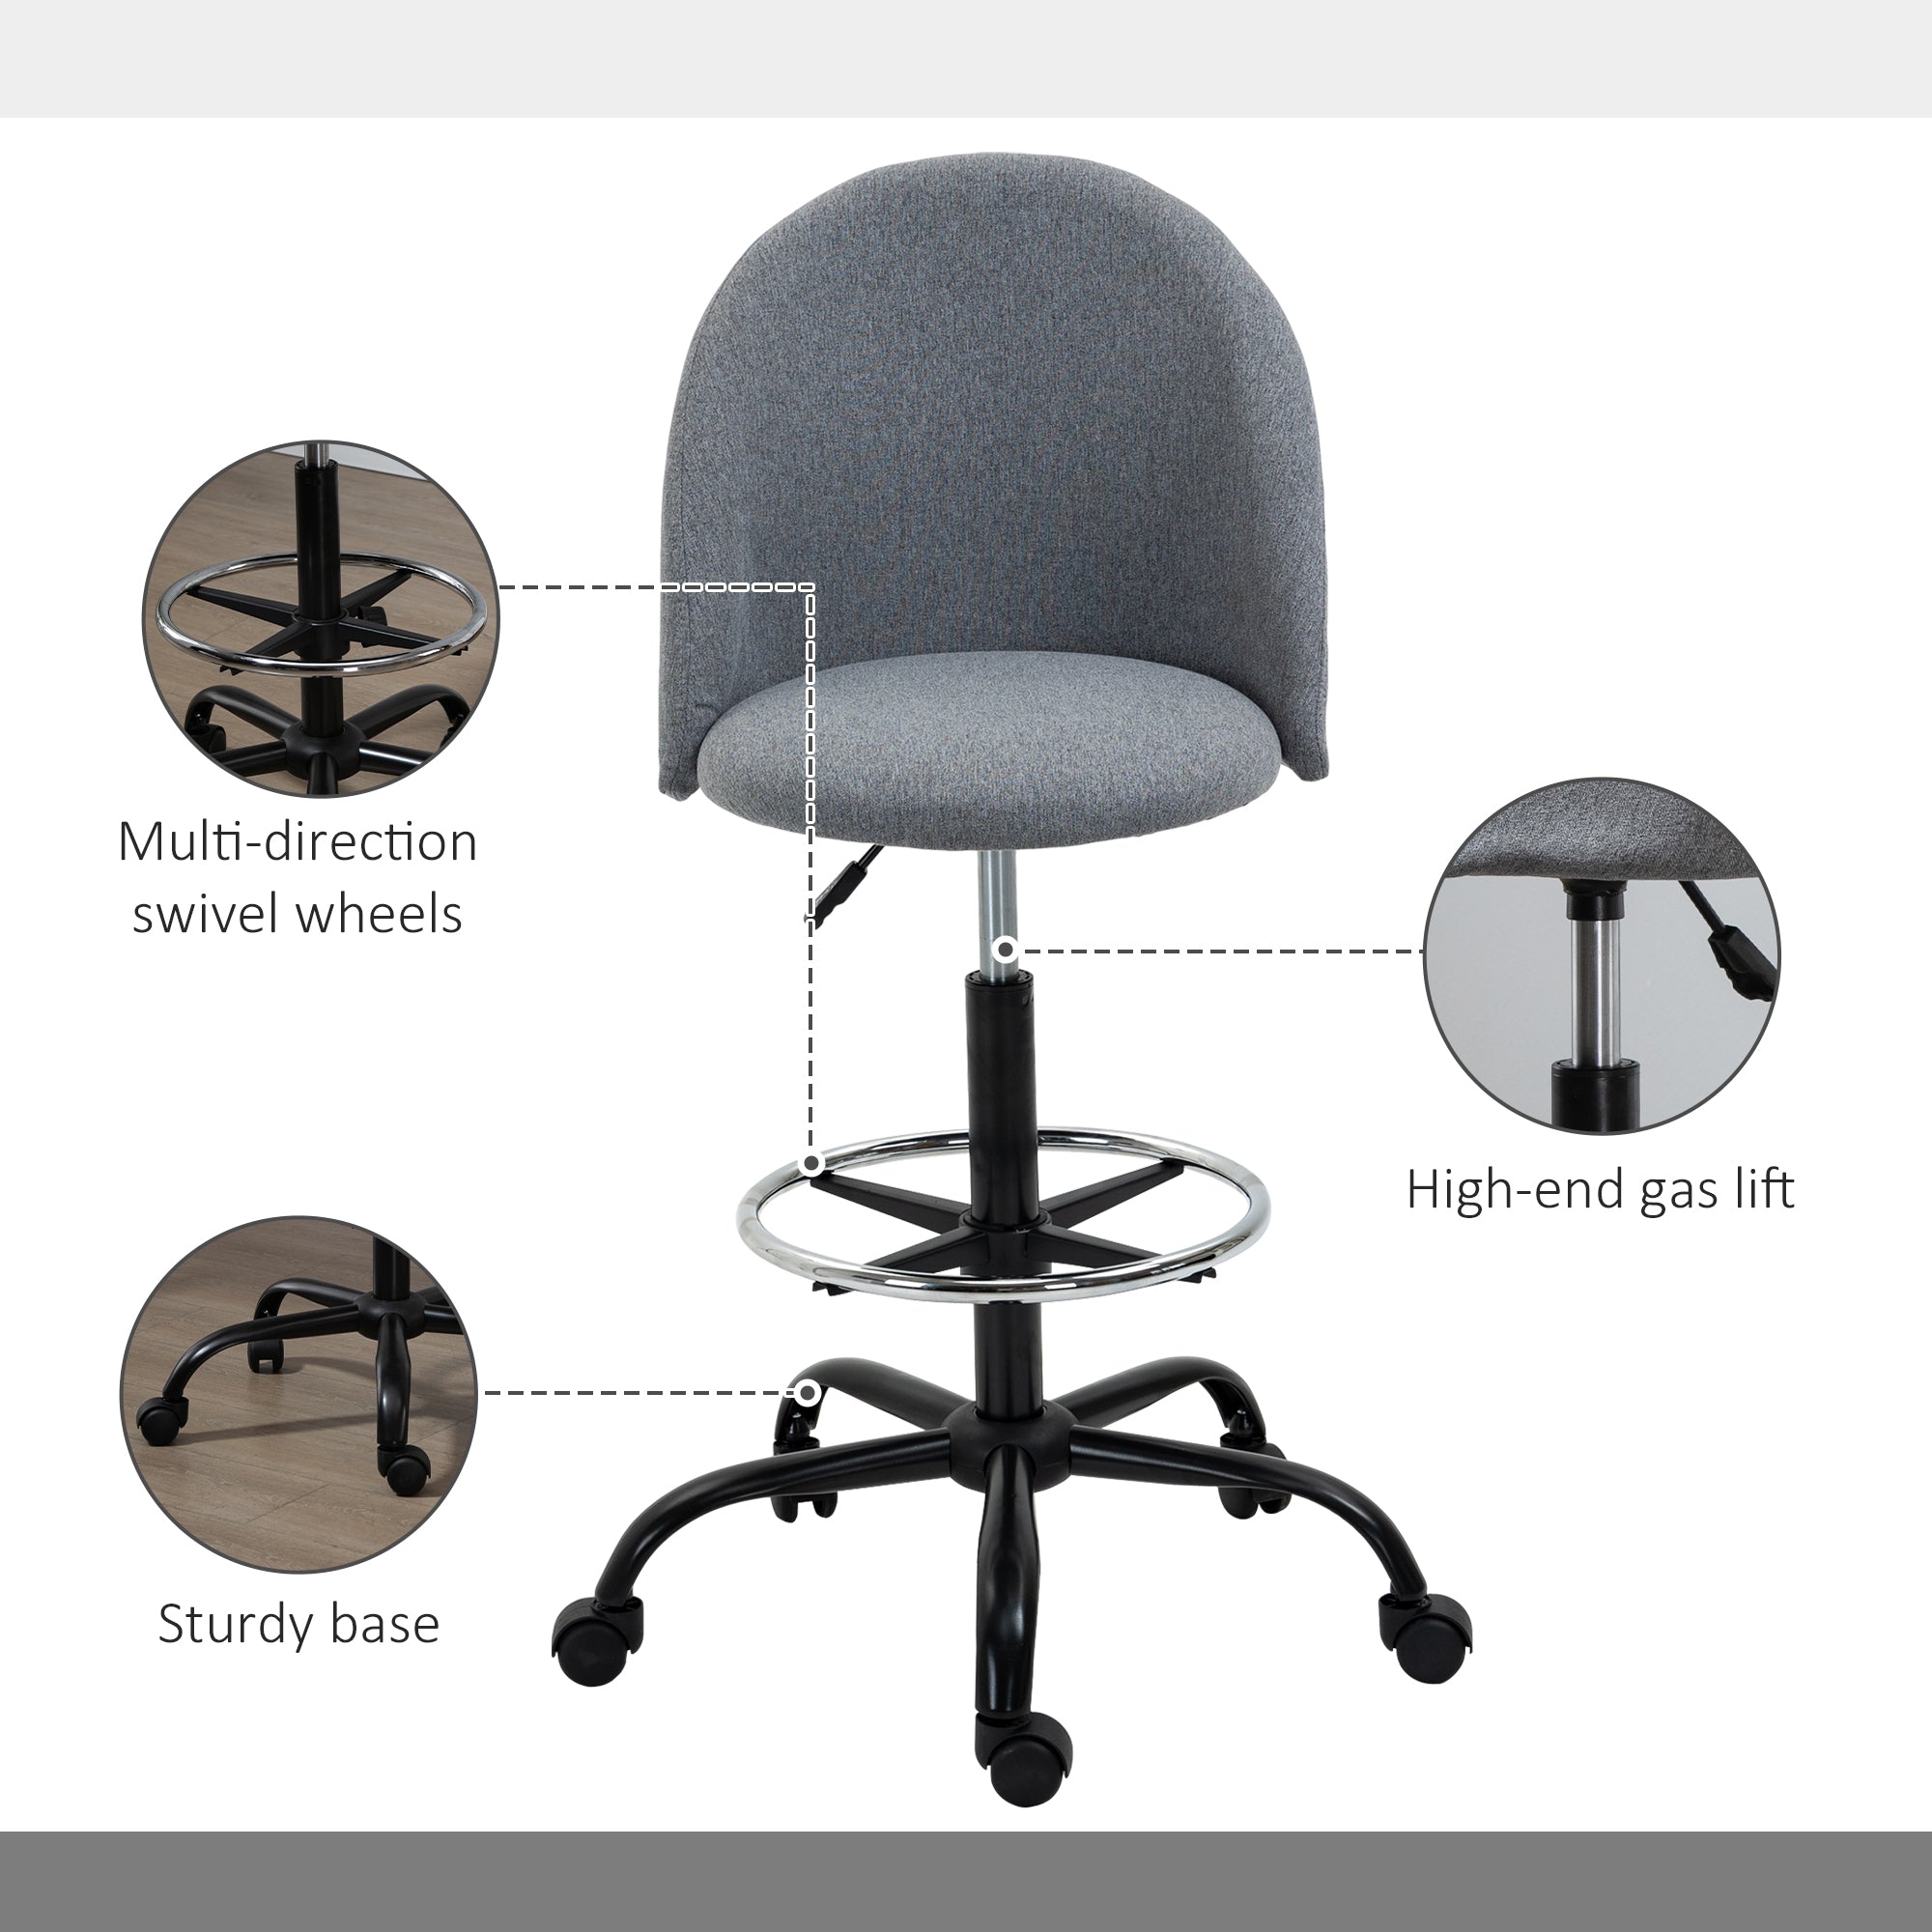 Vinsetto Ergonomic Drafting chair Adjustable Height w/ 5 Wheels Padded Seat Footrest 360° Swivel Freely Comfortable Versatile Use For Home Office - Inspirely